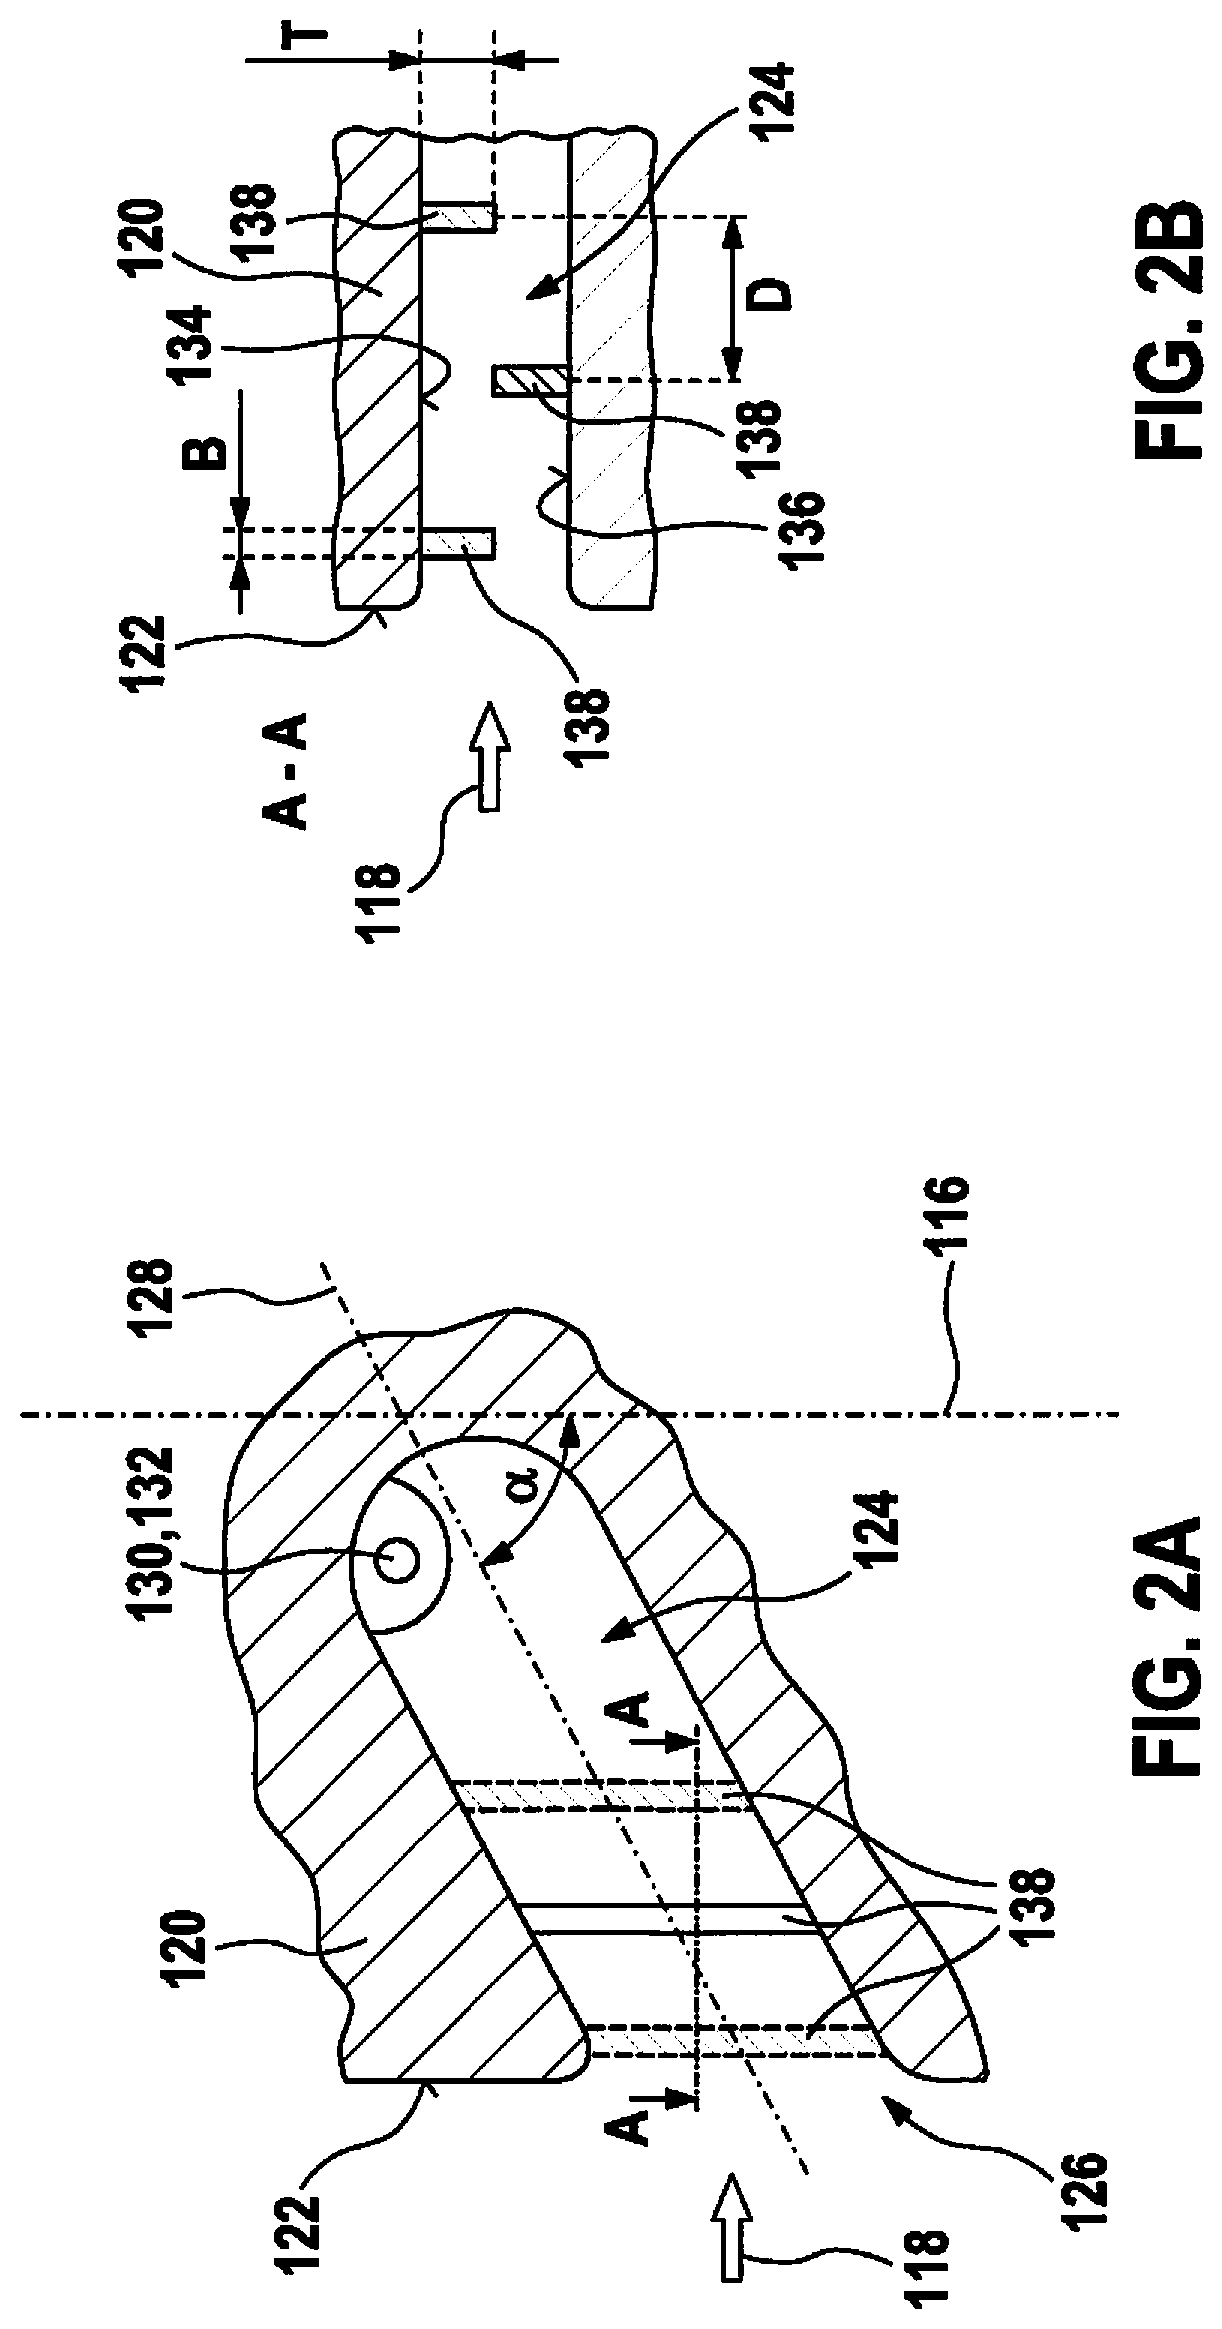 Pressure based flow sensor element having a pressure sensor and ribs positioned in the flow passage